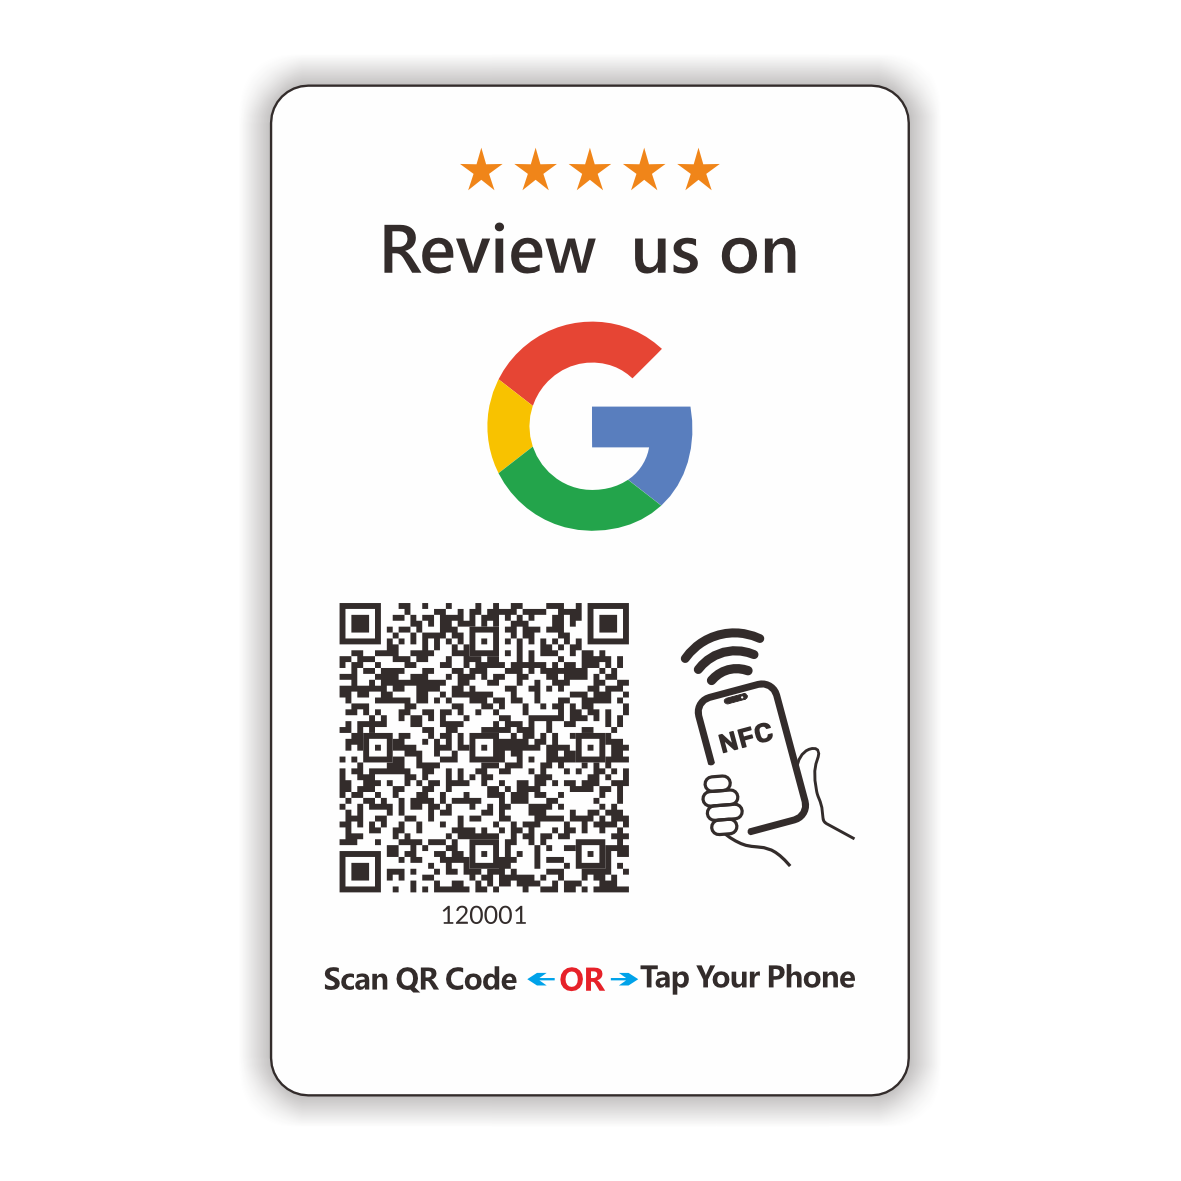 Contactless Sharing Smart NFC 'Review Us on Google Card' Touchless Card Reusable QR Code Tap Review Card